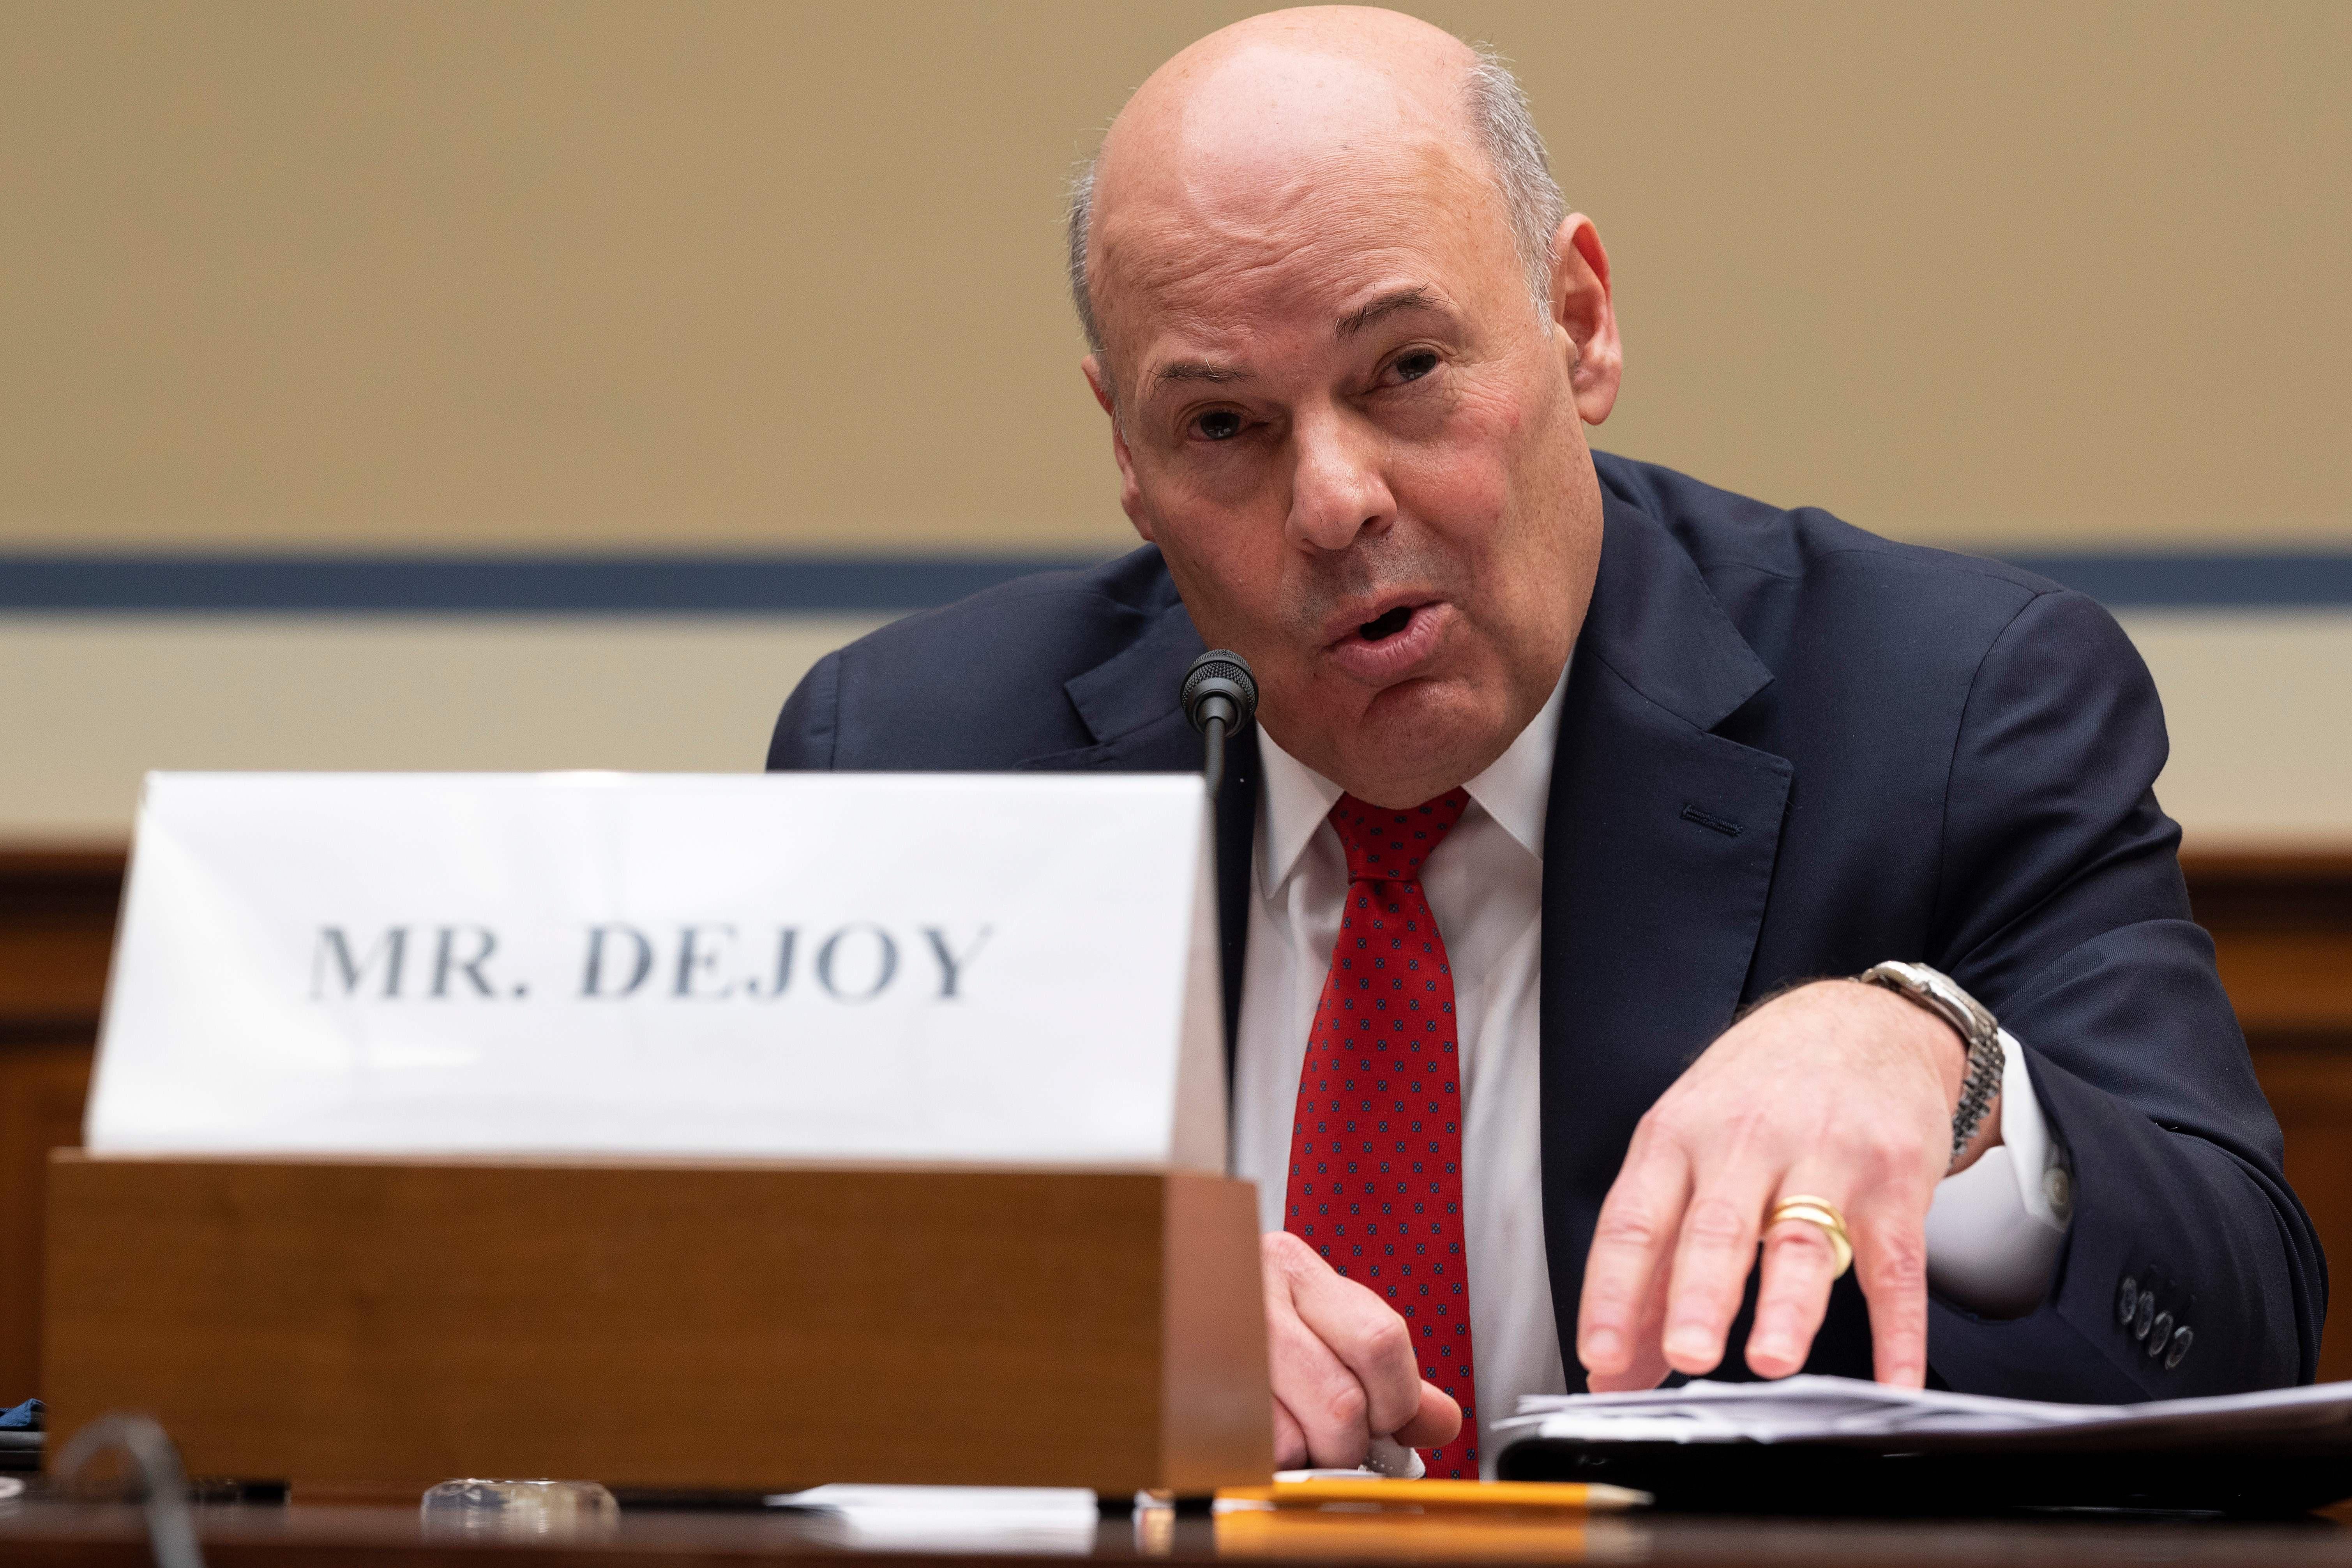 Louis DeJoy speaks while seated in a congressional hearing.